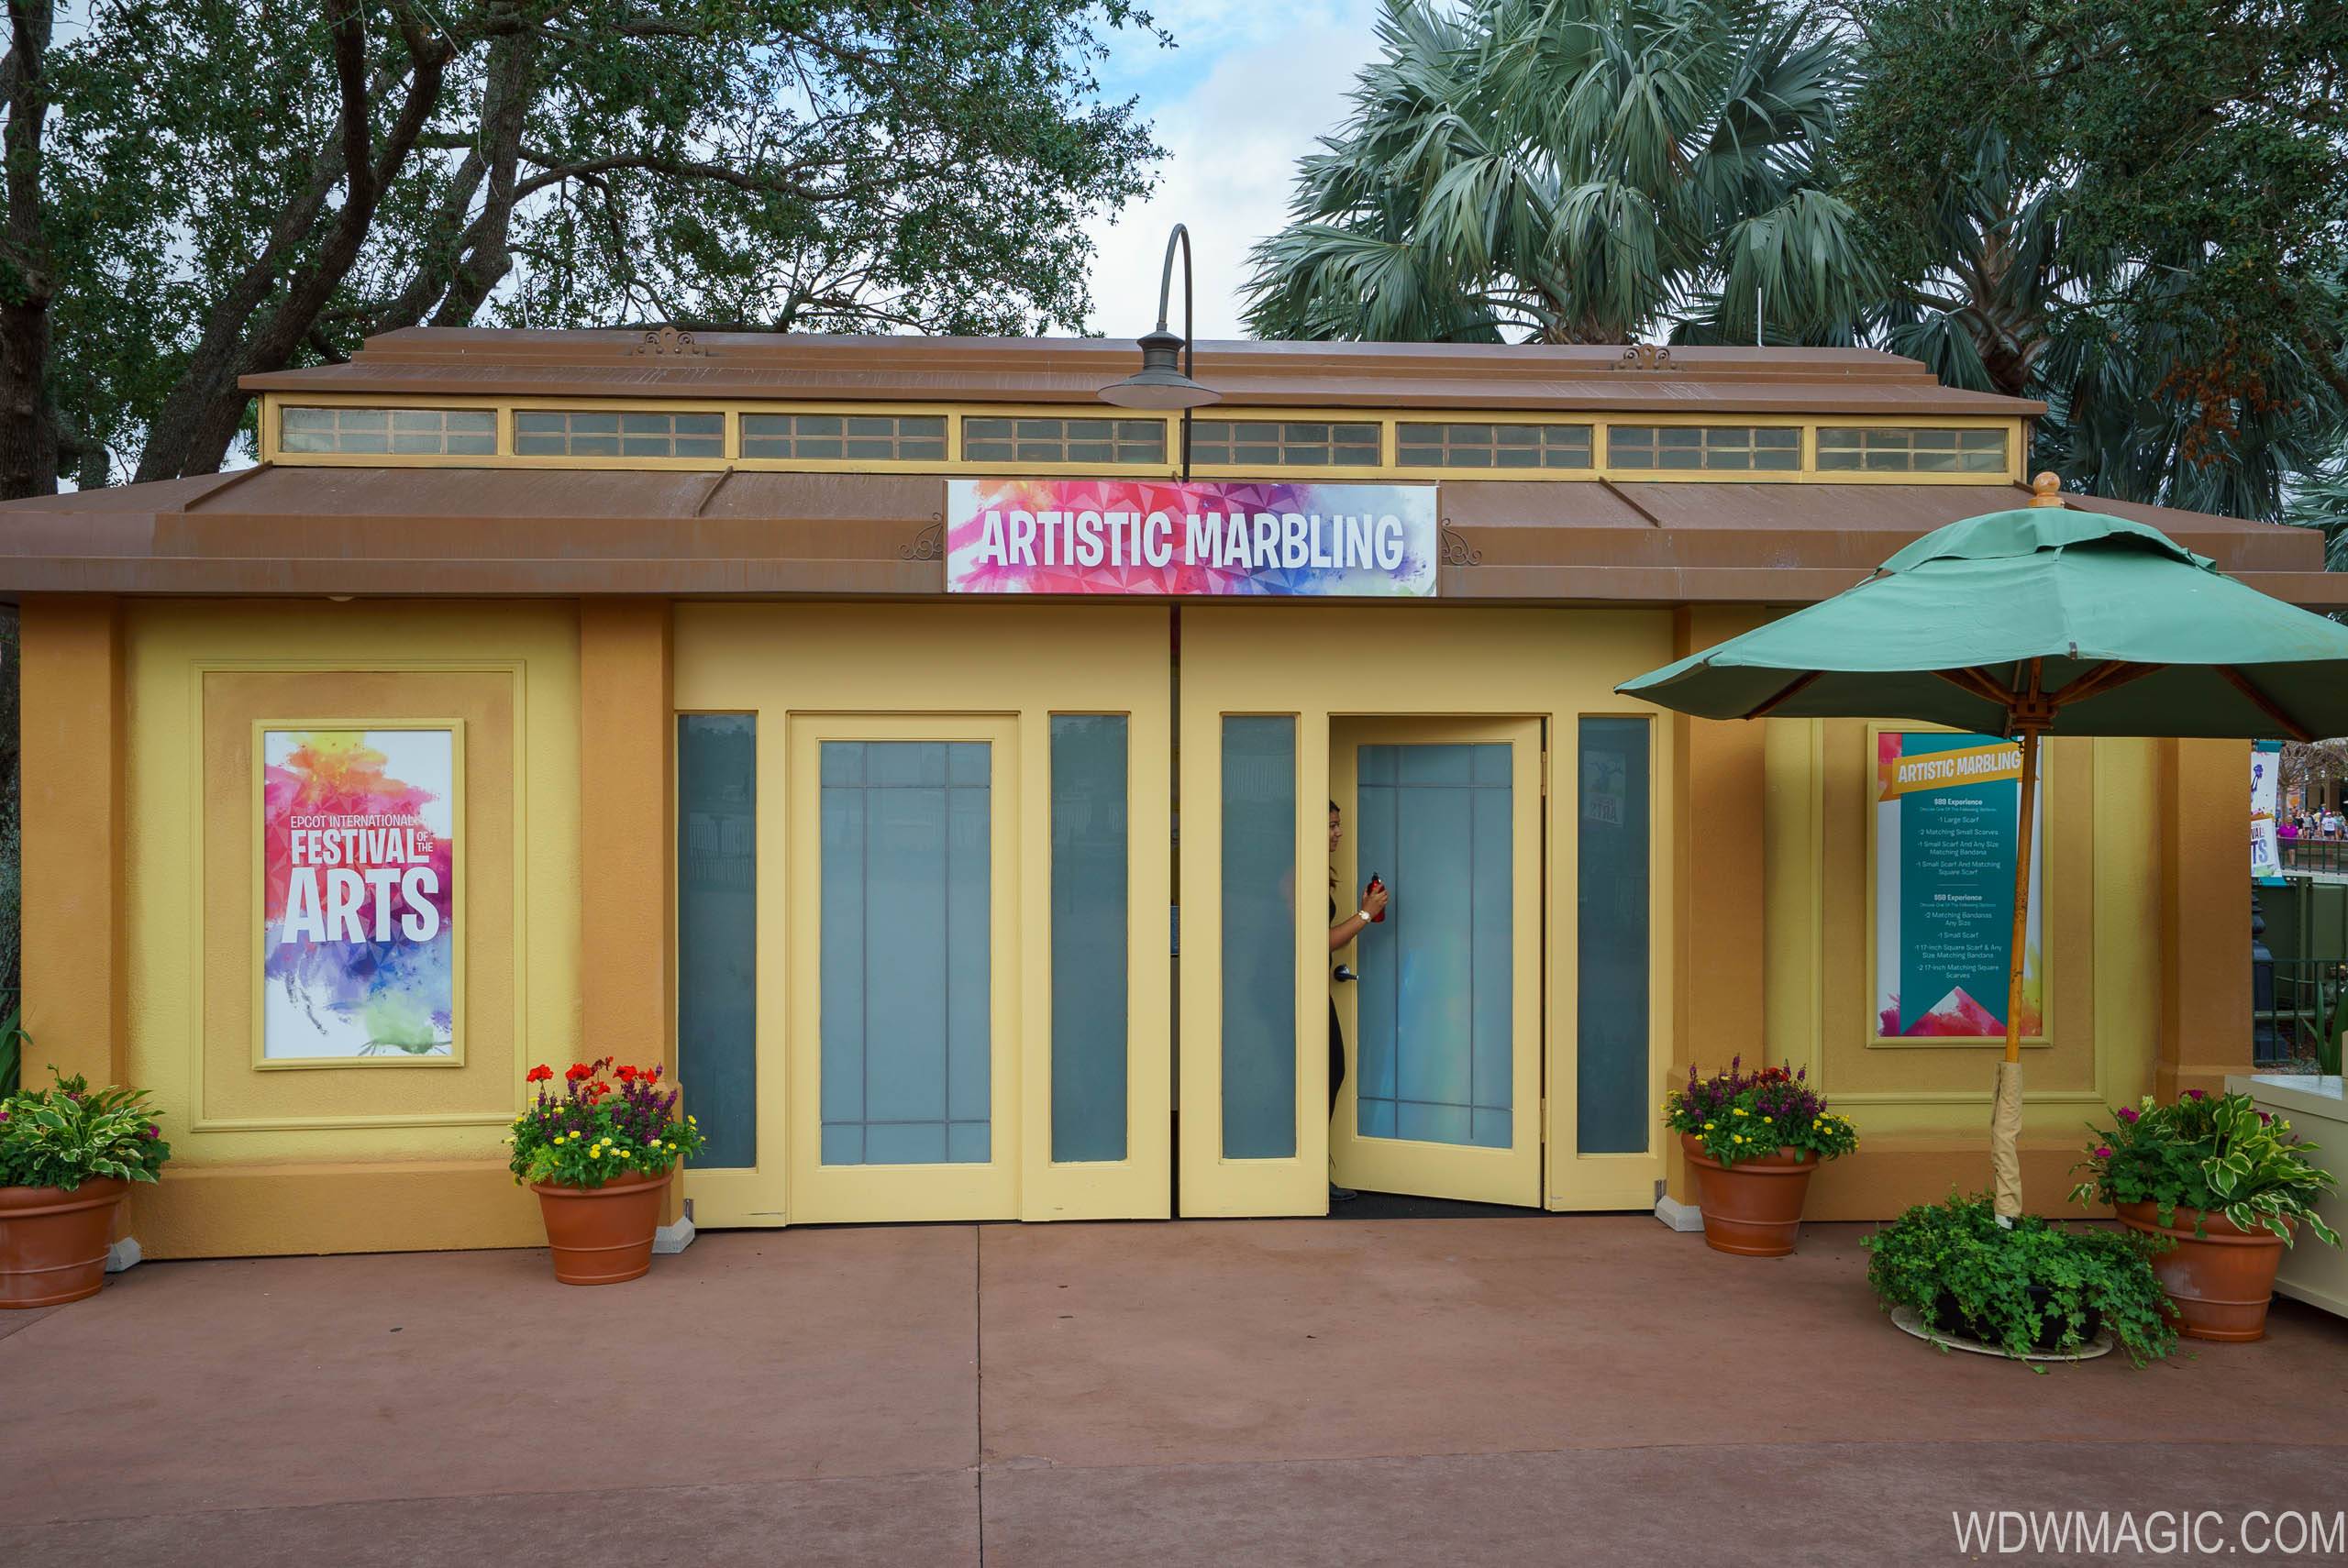 Opening day at the 2018 Epcot International Festival of the Arts